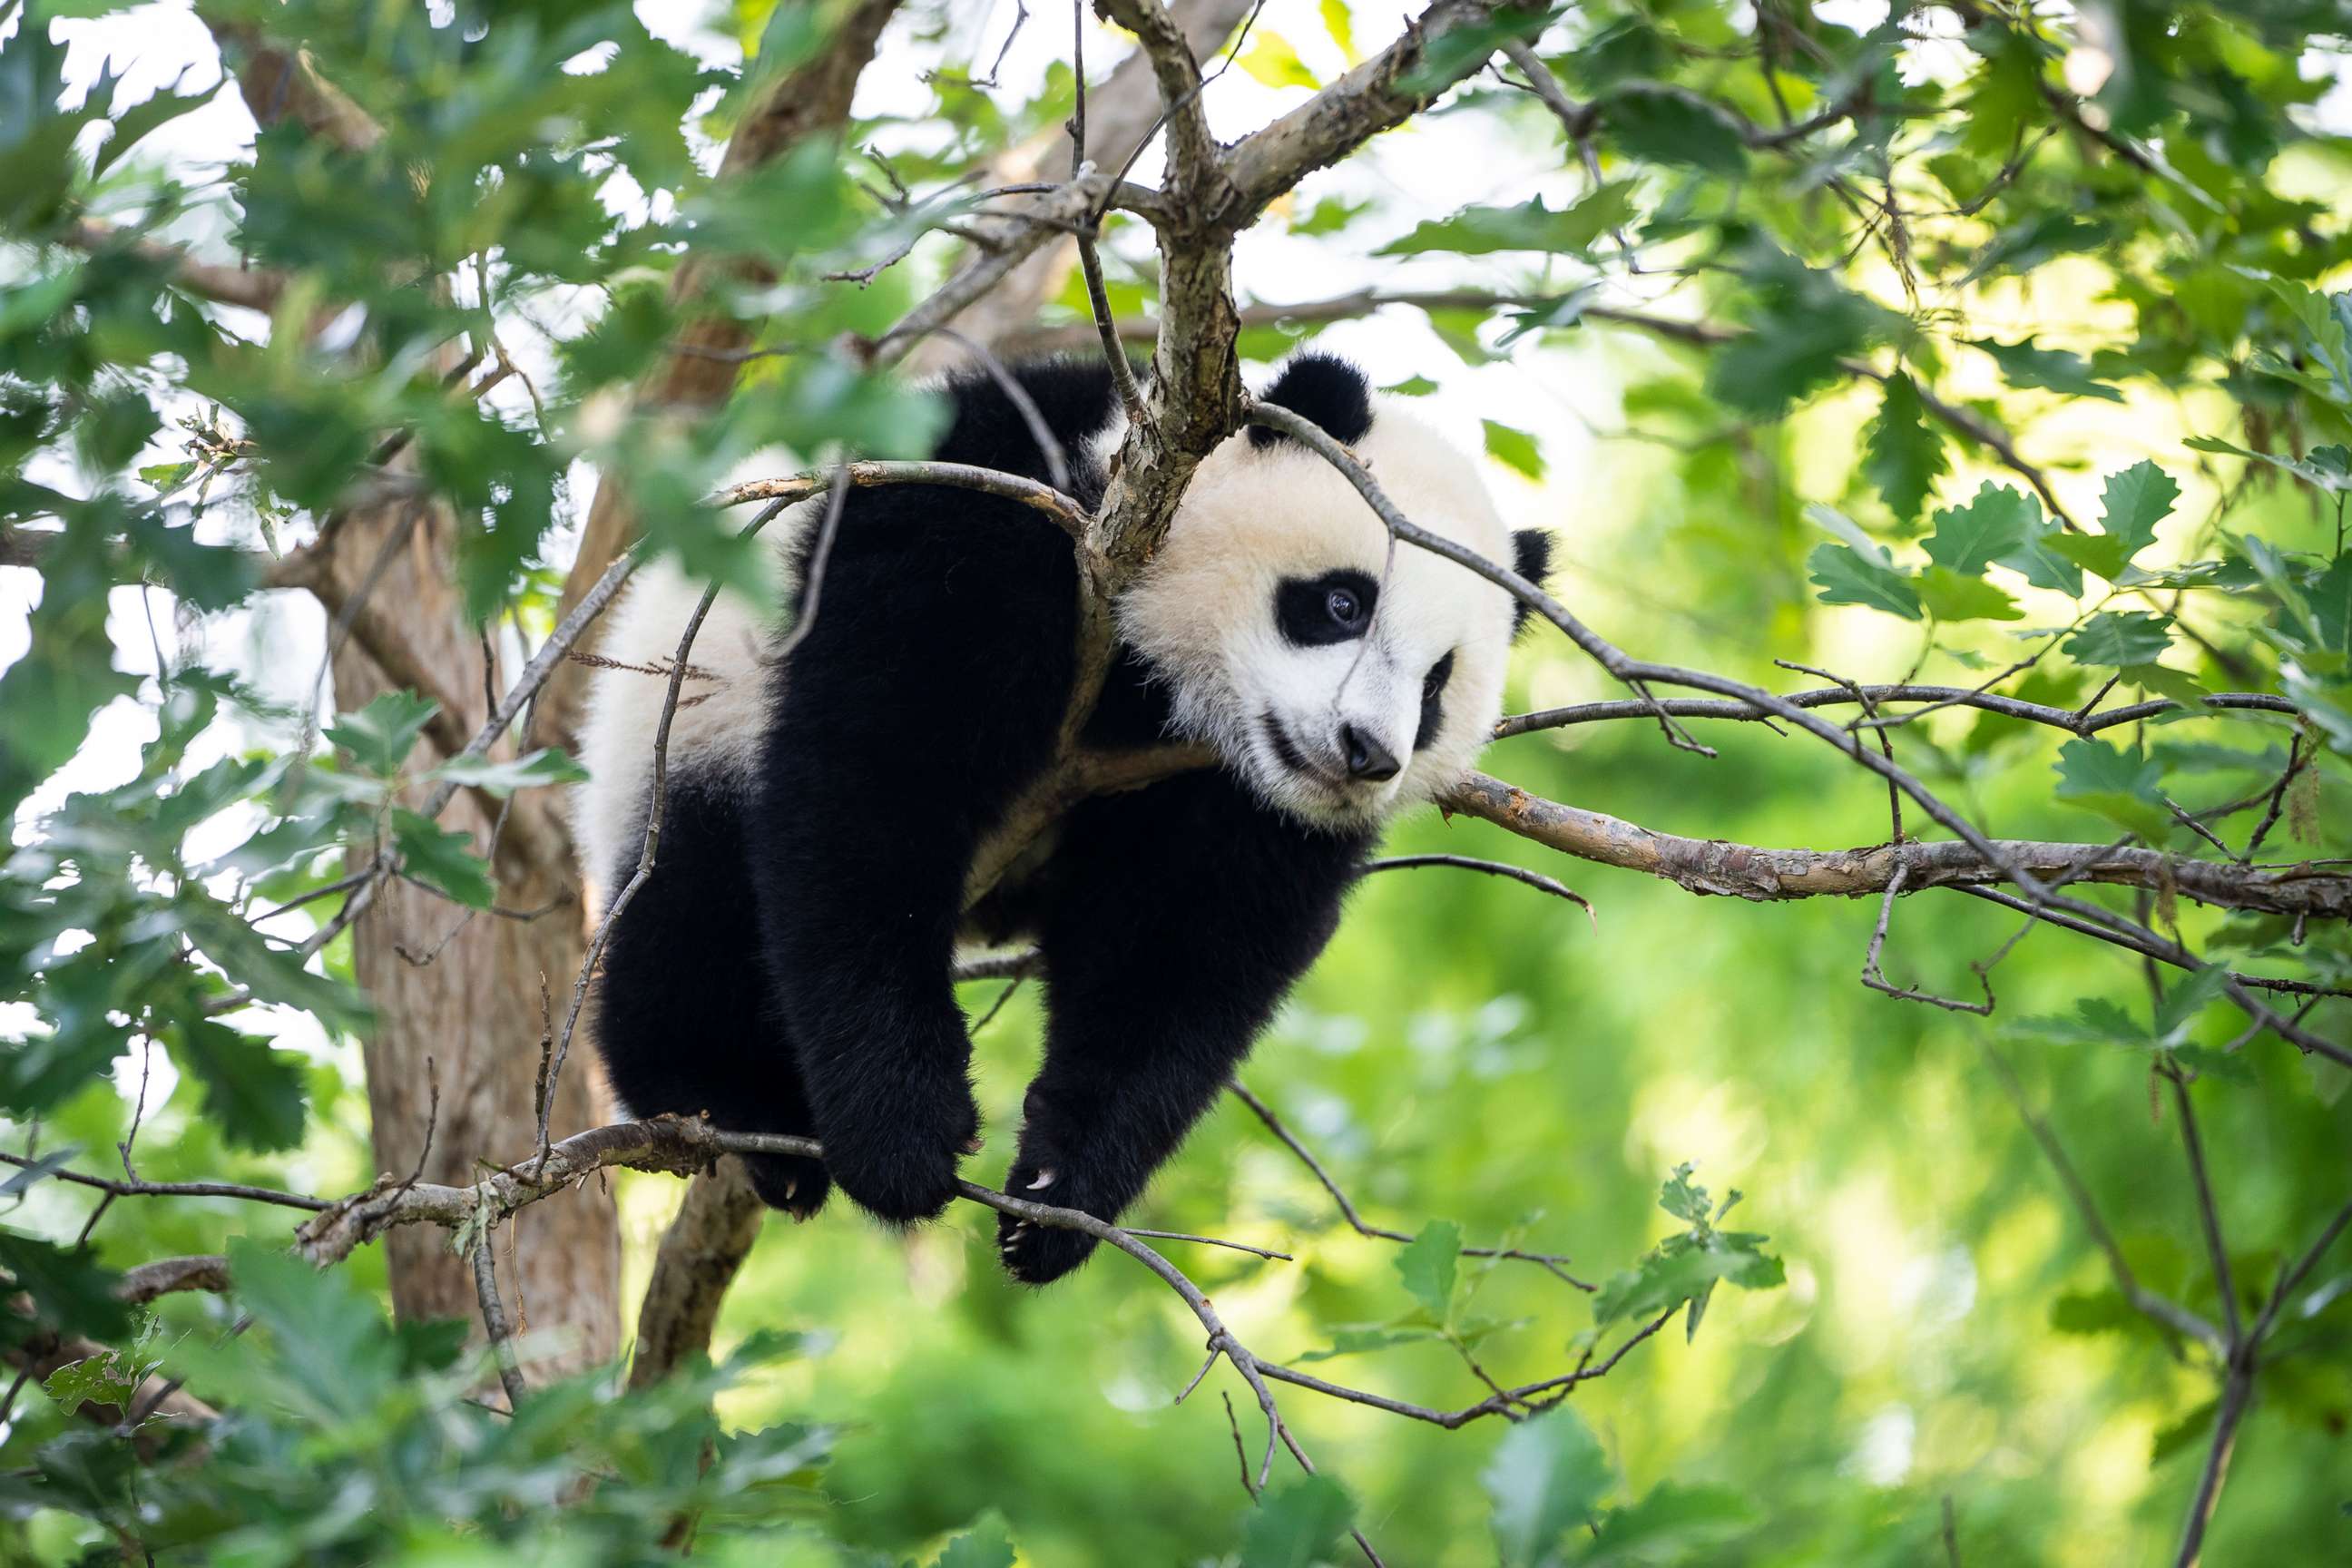 PHOTO: Nine-month-old male giant panda cub Xiao Qi Ji climbs in a tree at the Smithsonian National Zoon on May 19, 2021, in Washington, D.C.